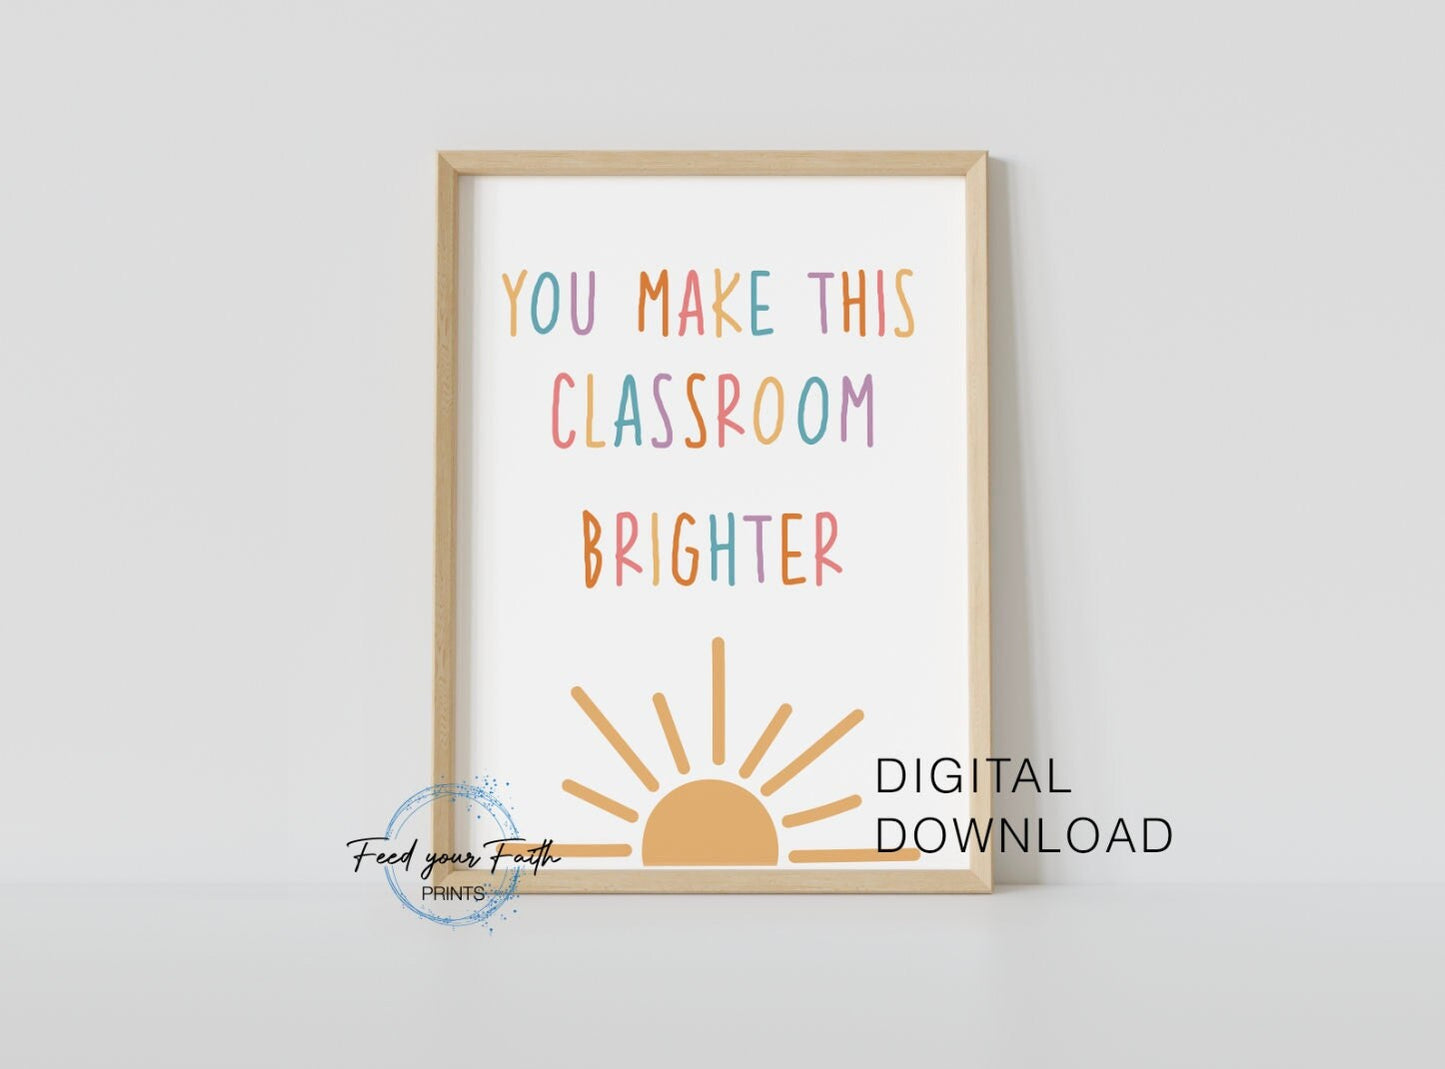 You Make This You make this Classroom Brighter Classroom Printable Boho Classroom Decor Classroom Poster Playroom Decor Child Art